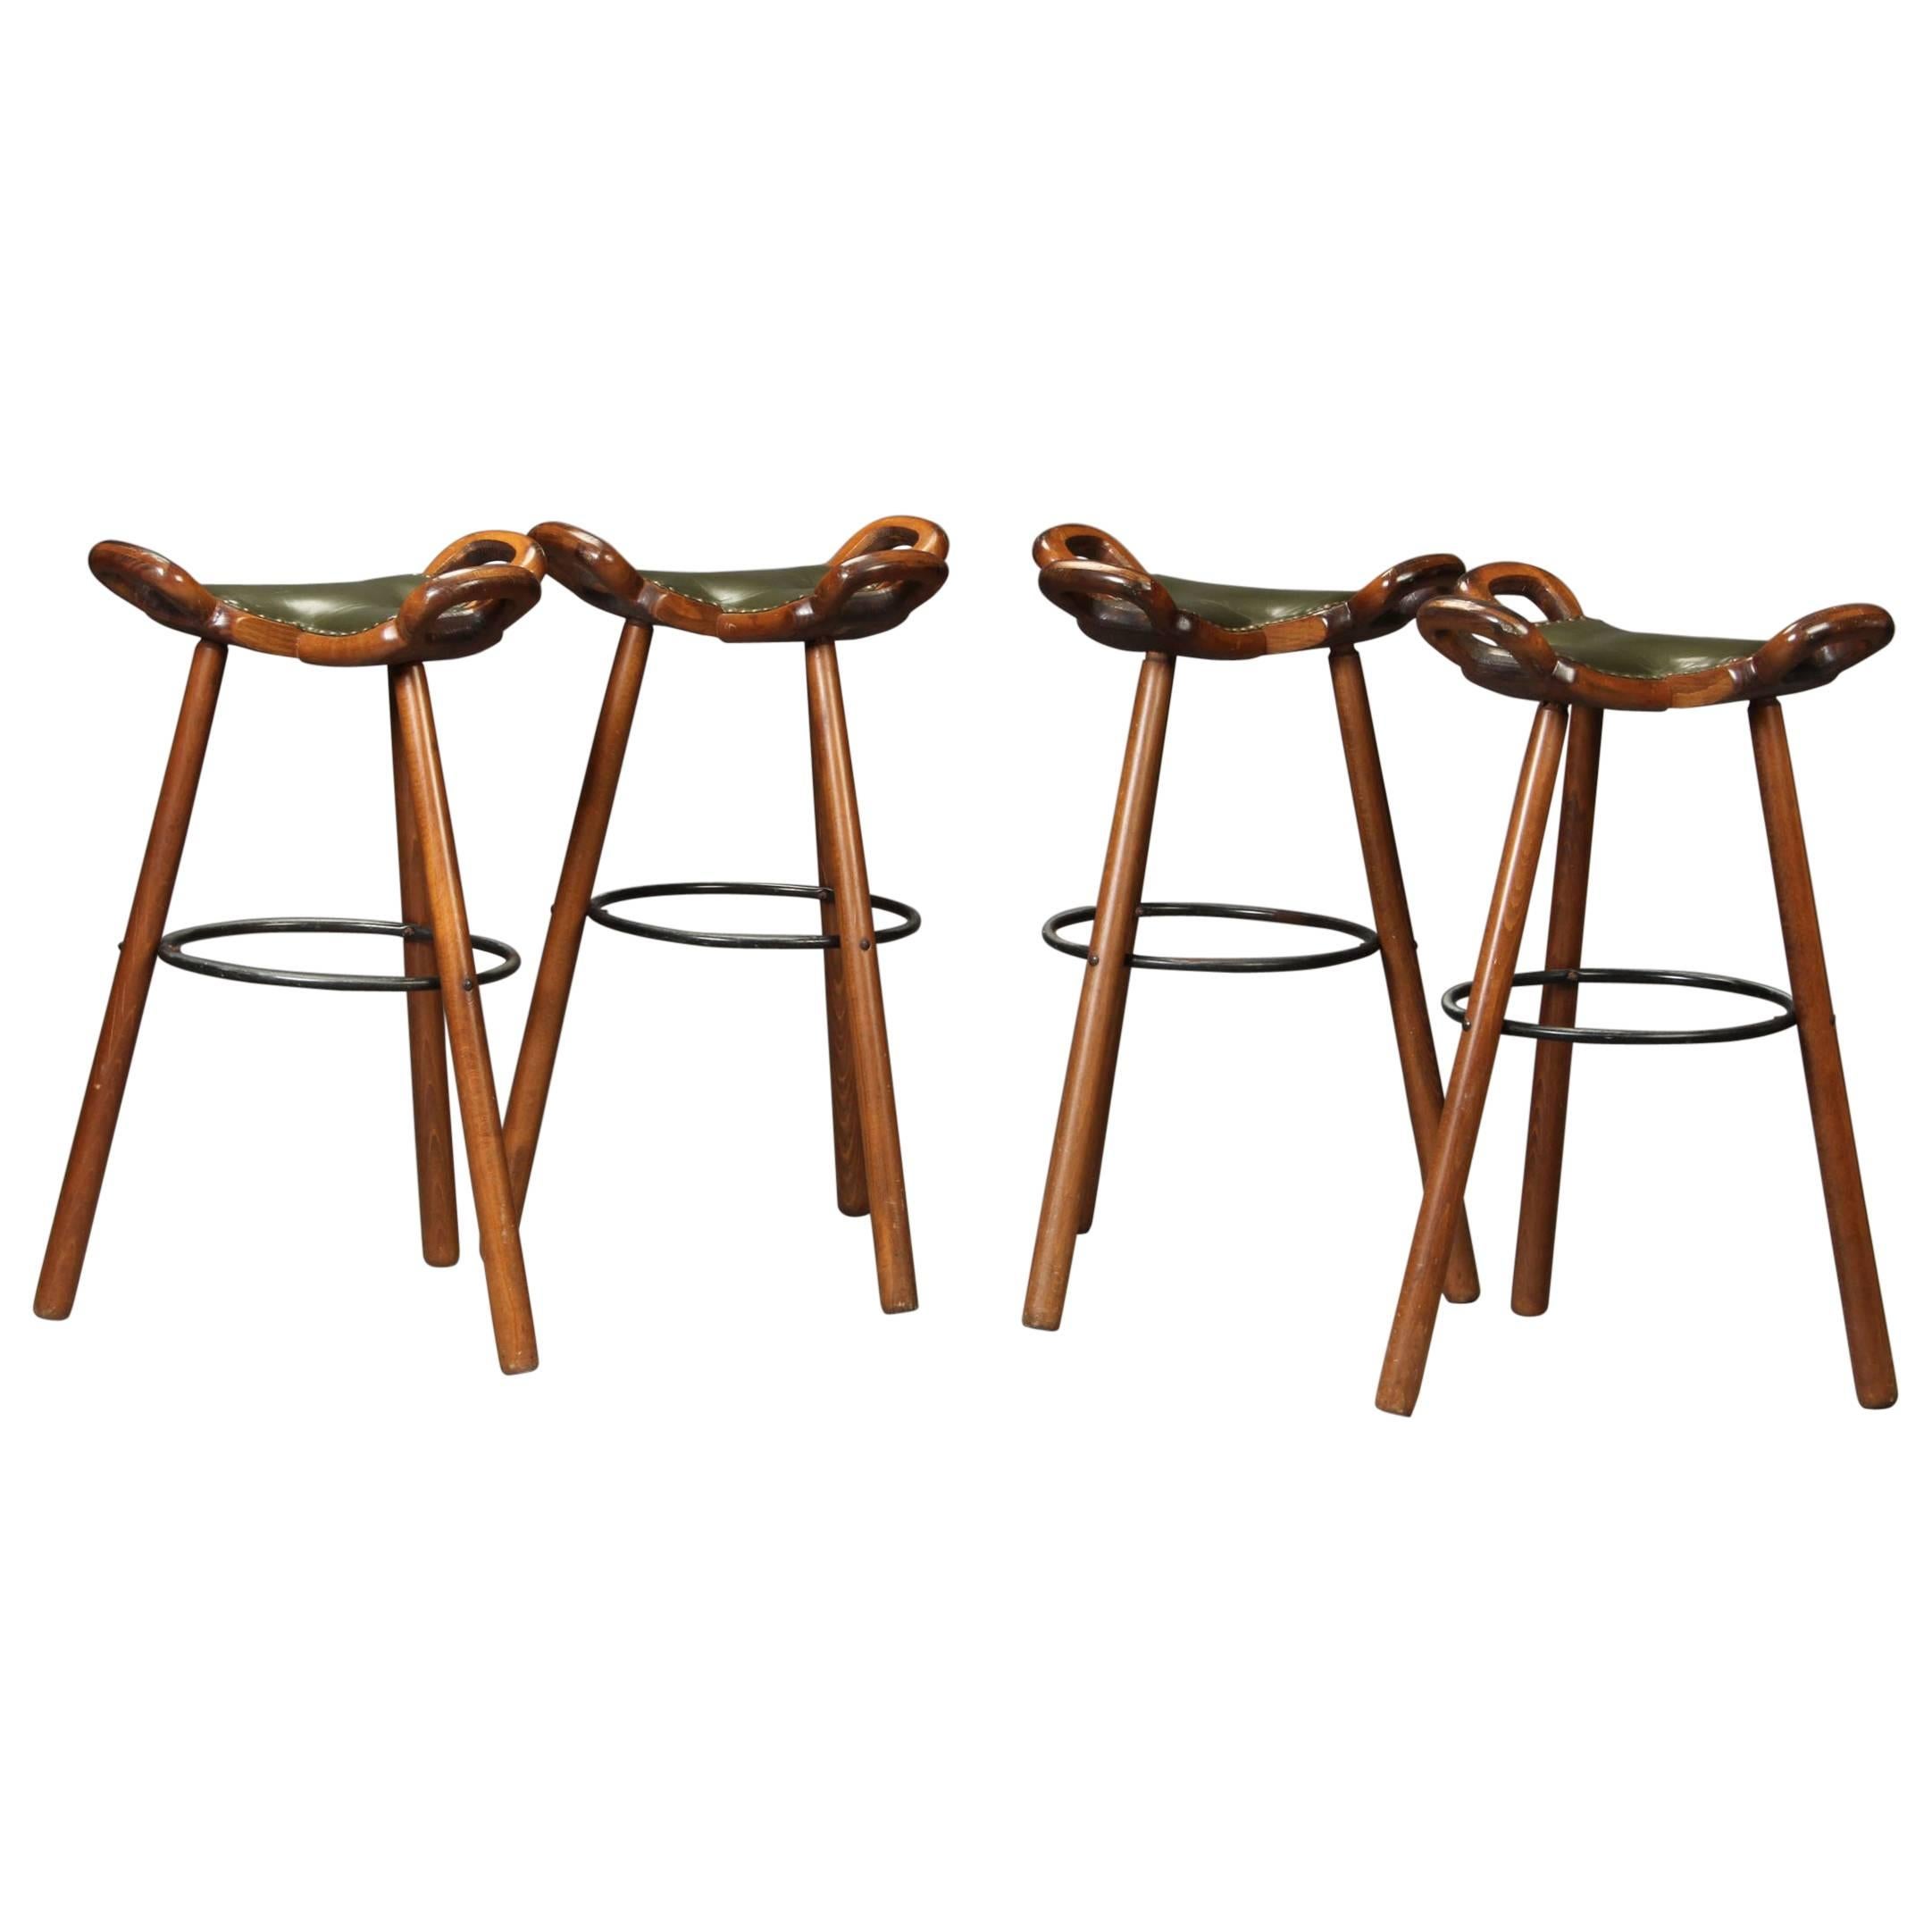 Set of Four 'Marbella' High Stools by Sergio Rodriguez for Confonorm